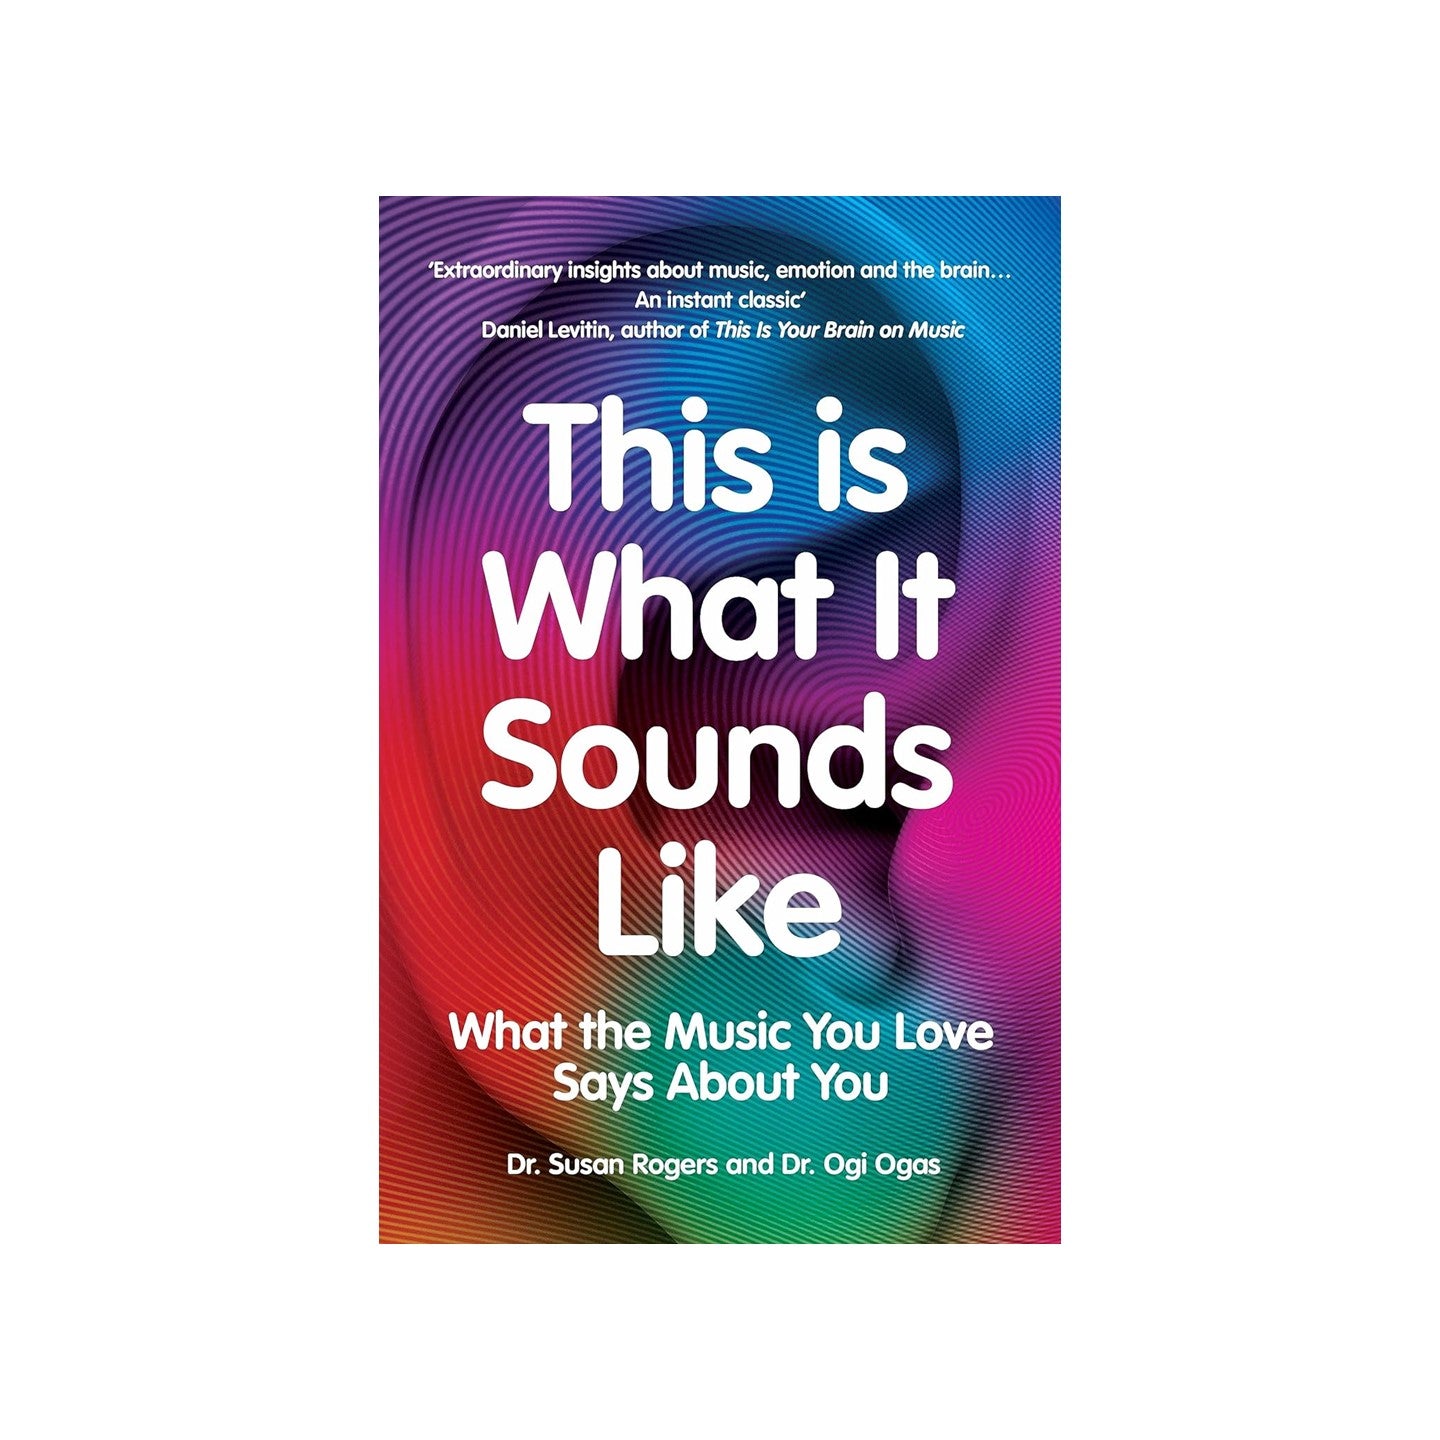 This Is What It Sounds Like: What the Music You Love Says